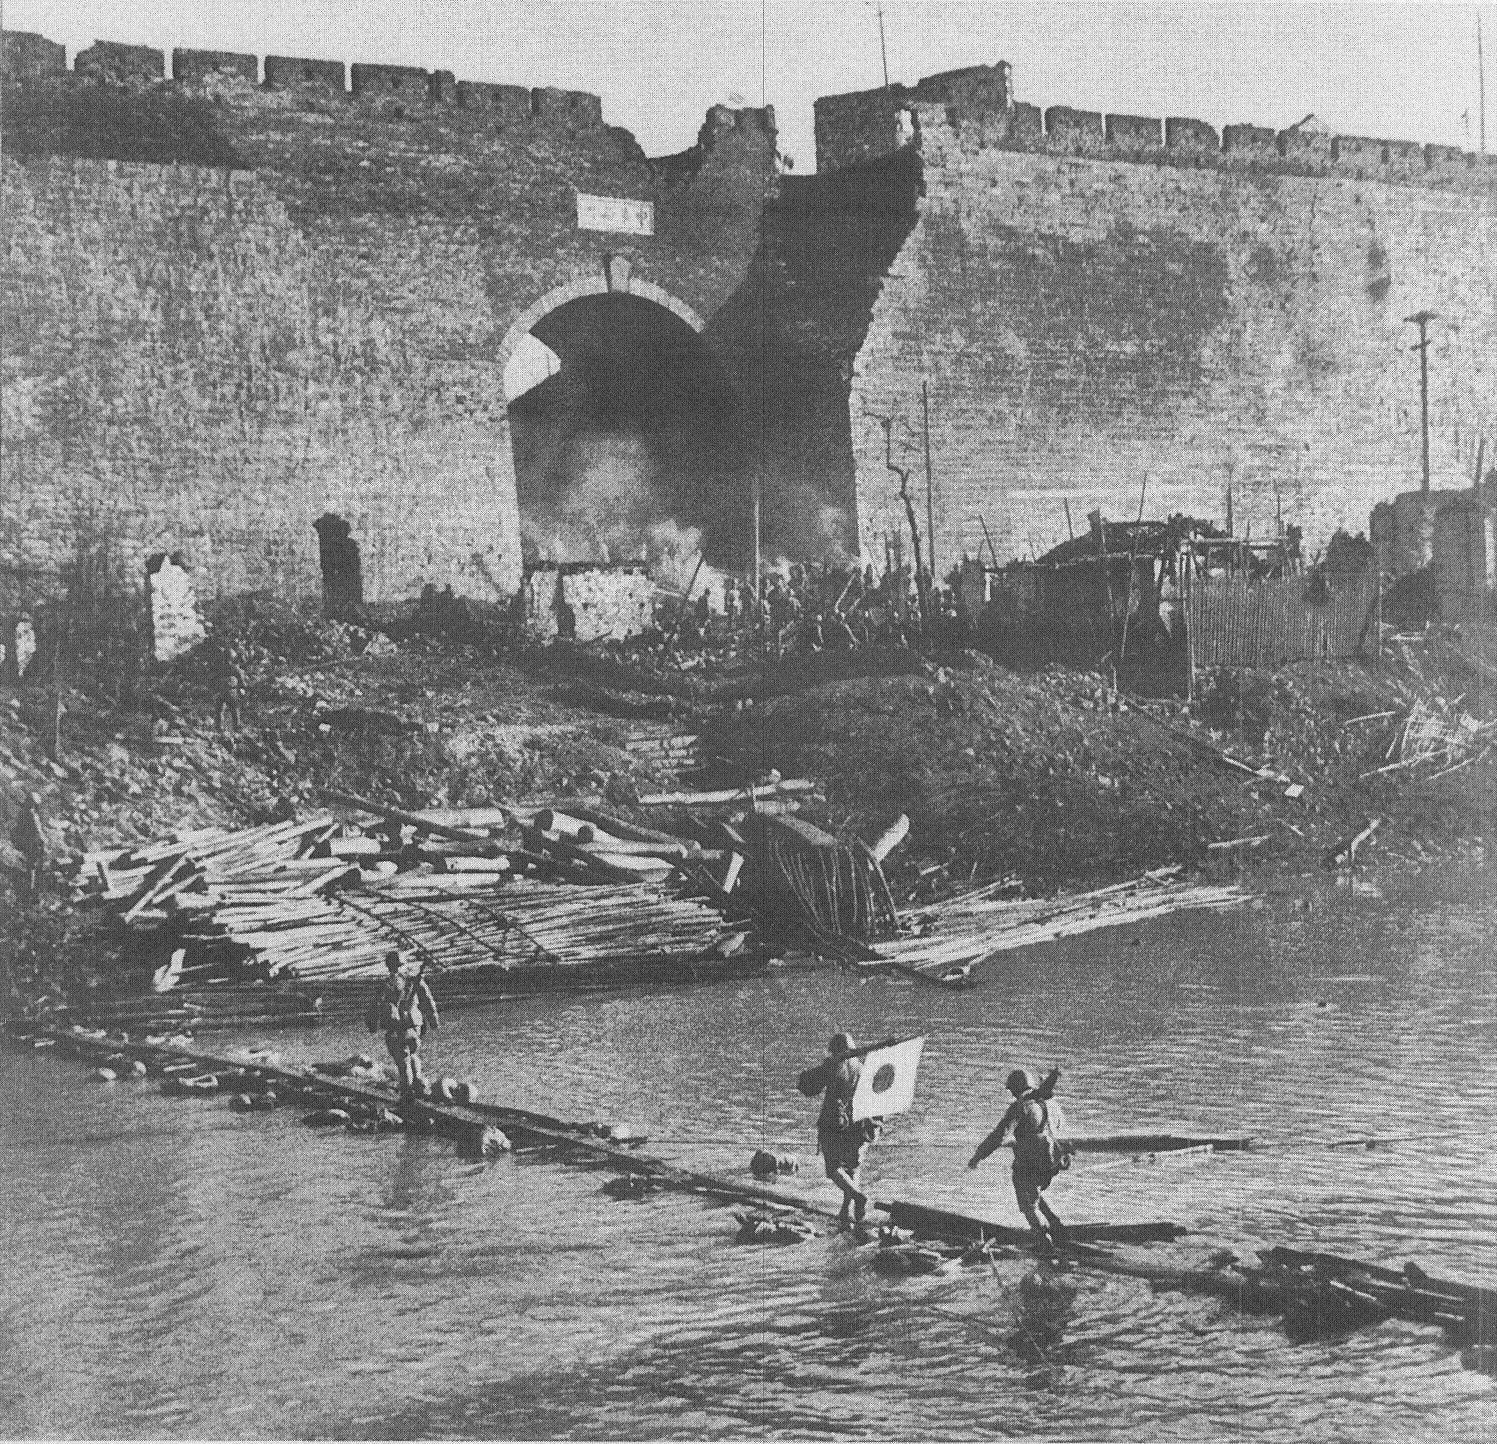 Japanese soldiers crossing a river near the Nanjing city wall, China, 13 Dec 1937